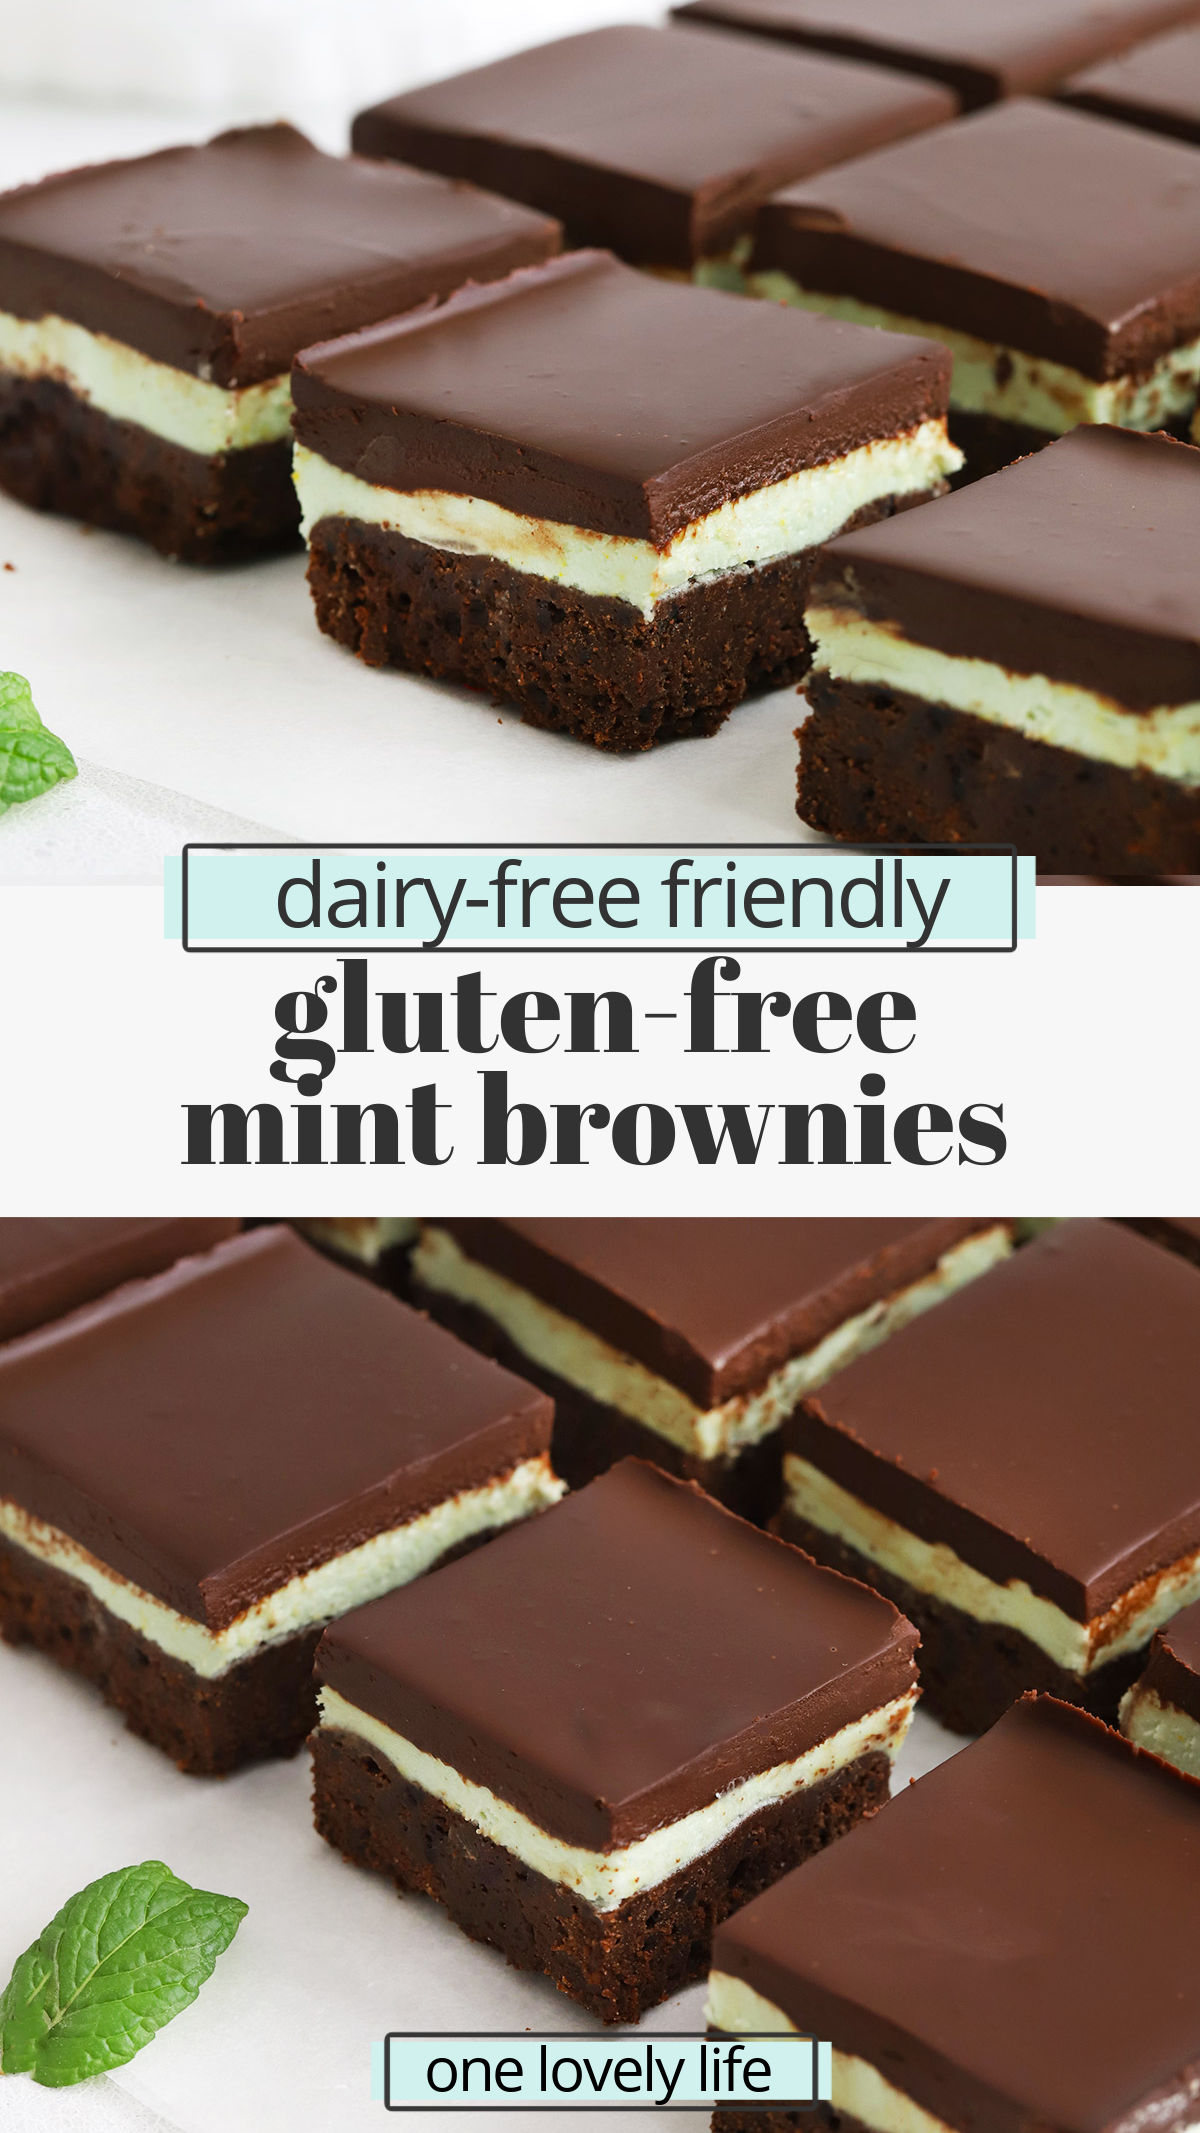 Gluten-Free Mint Brownies - Fudgy gluten-free brownies topped with mint frosting & chocolate ganache make a perfect retro treat! (Dairy-Free) // Gluten Free Mint Brownies // Gluten Free Frosted Mint Brownies // Gluten Free Grasshopper Brownies // Gluten Free BYU Mint Brownies // Mint Frosted Brownies // Gluten Free Frosted Brownies